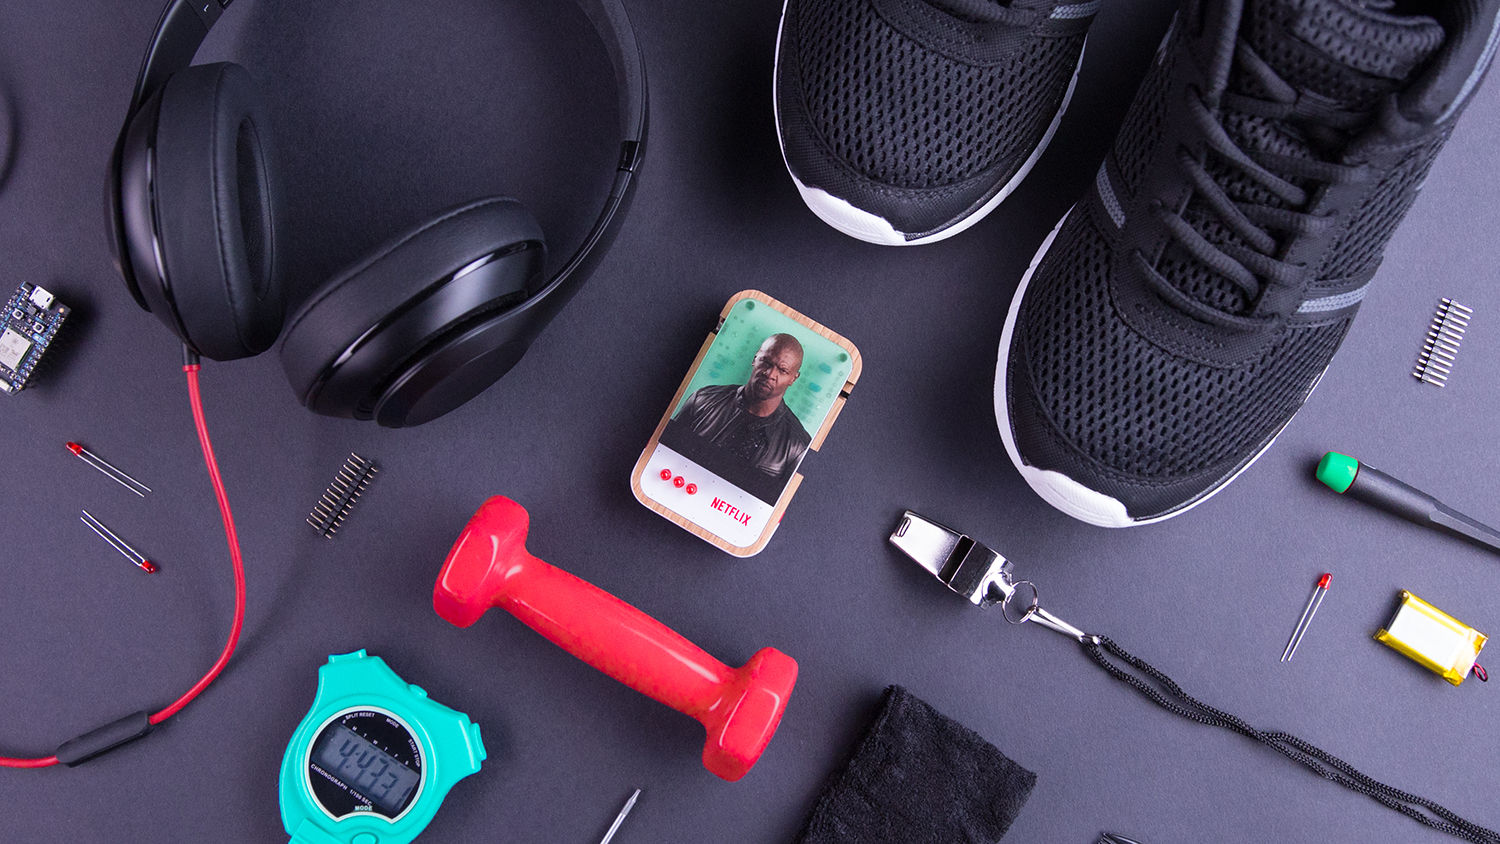 All work, no chill: Netflix launches DIY personal trainer